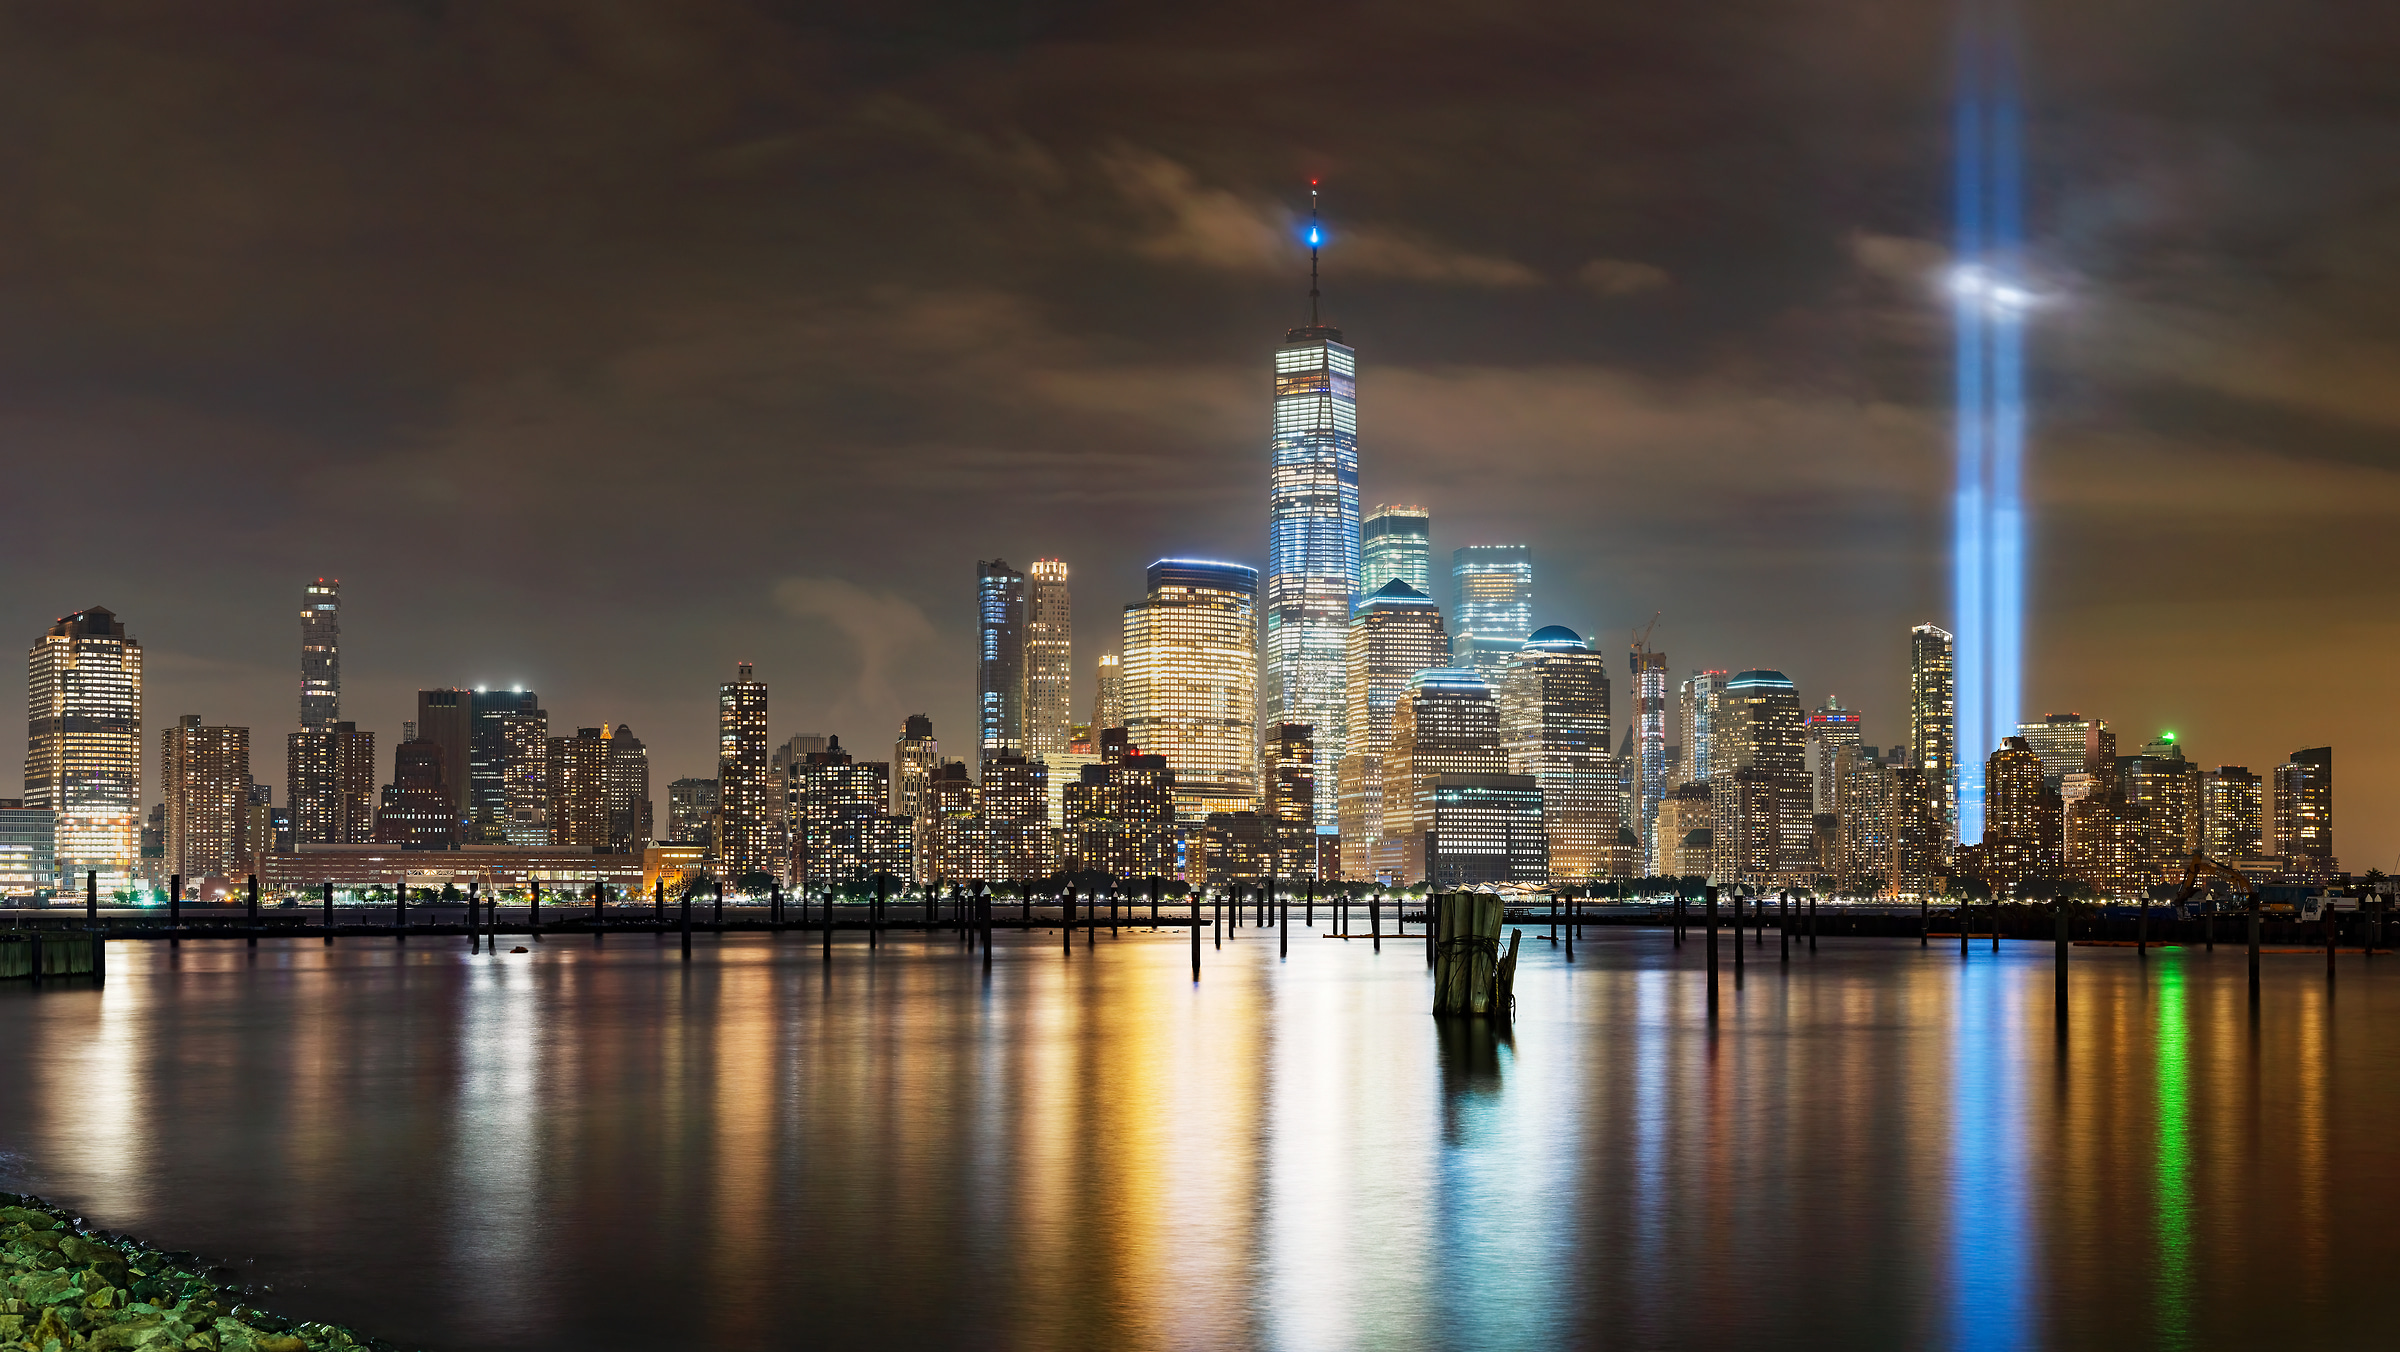 367 megapixels! A very high resolution, large-format VAST photo print of the 9/11 Tribute in Light memorial and the downtown Manhattan skyline at night; cityscape photograph created by Beyti Barbaros in Downtown Manhattan, New York City, New York